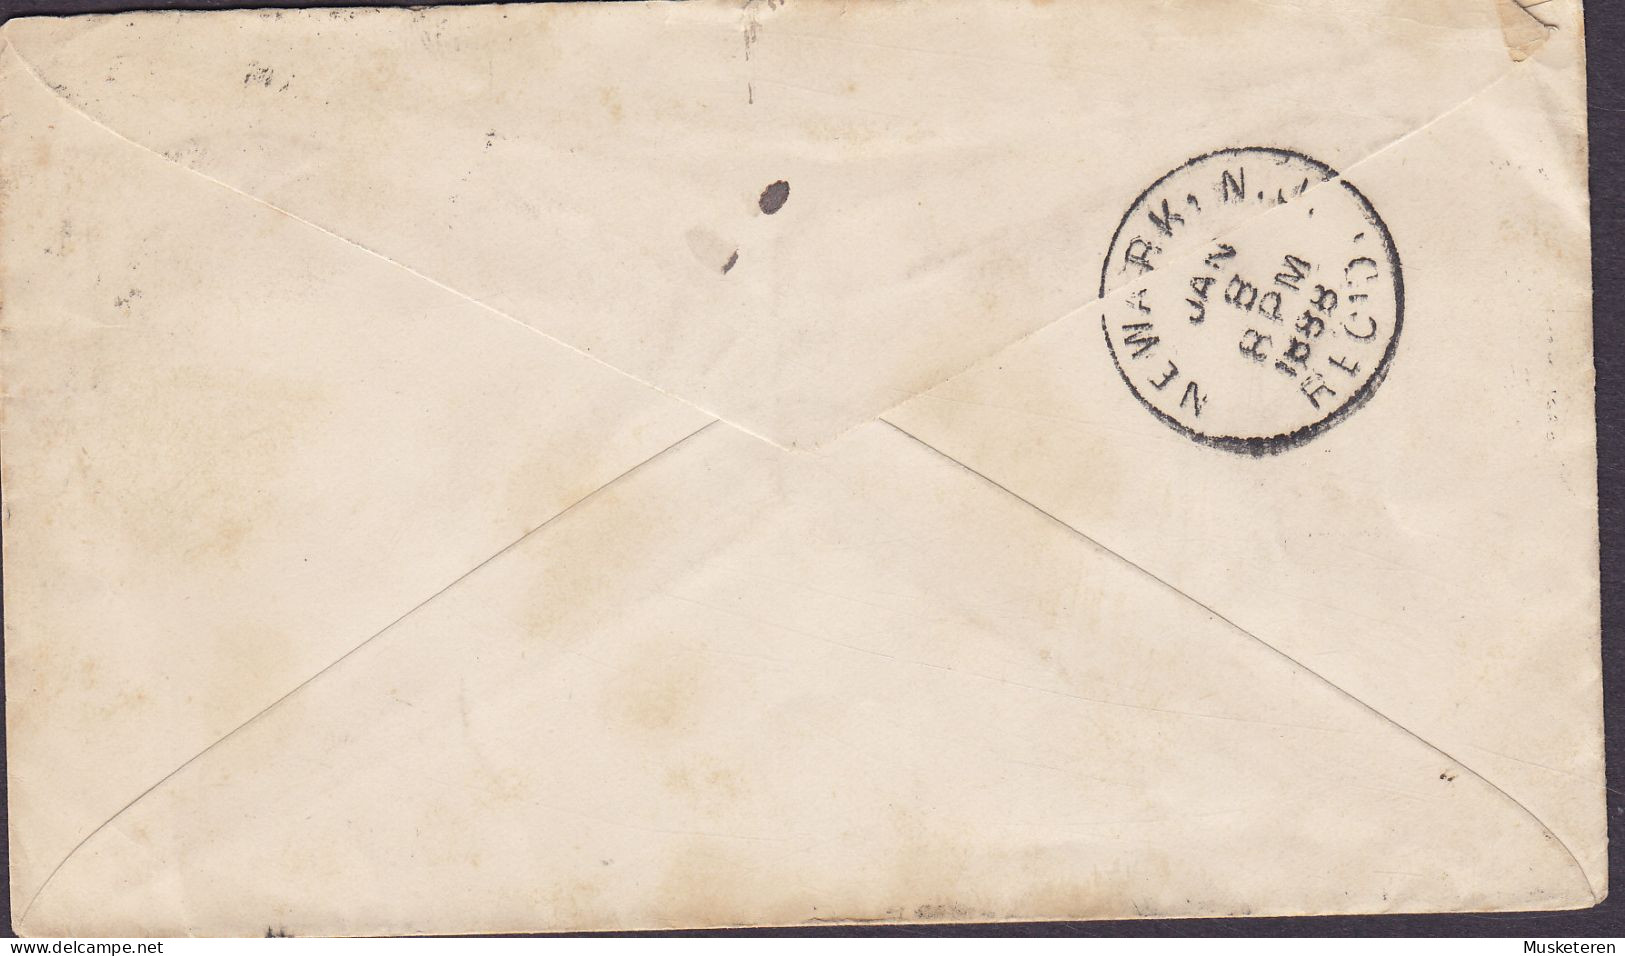 Canada ENTOMOLOGICAL SOCIETY Of Ontario LONDON Ontario 1888 Cover Lettre NEWARK USA 3c. Victoria Stamp - Covers & Documents